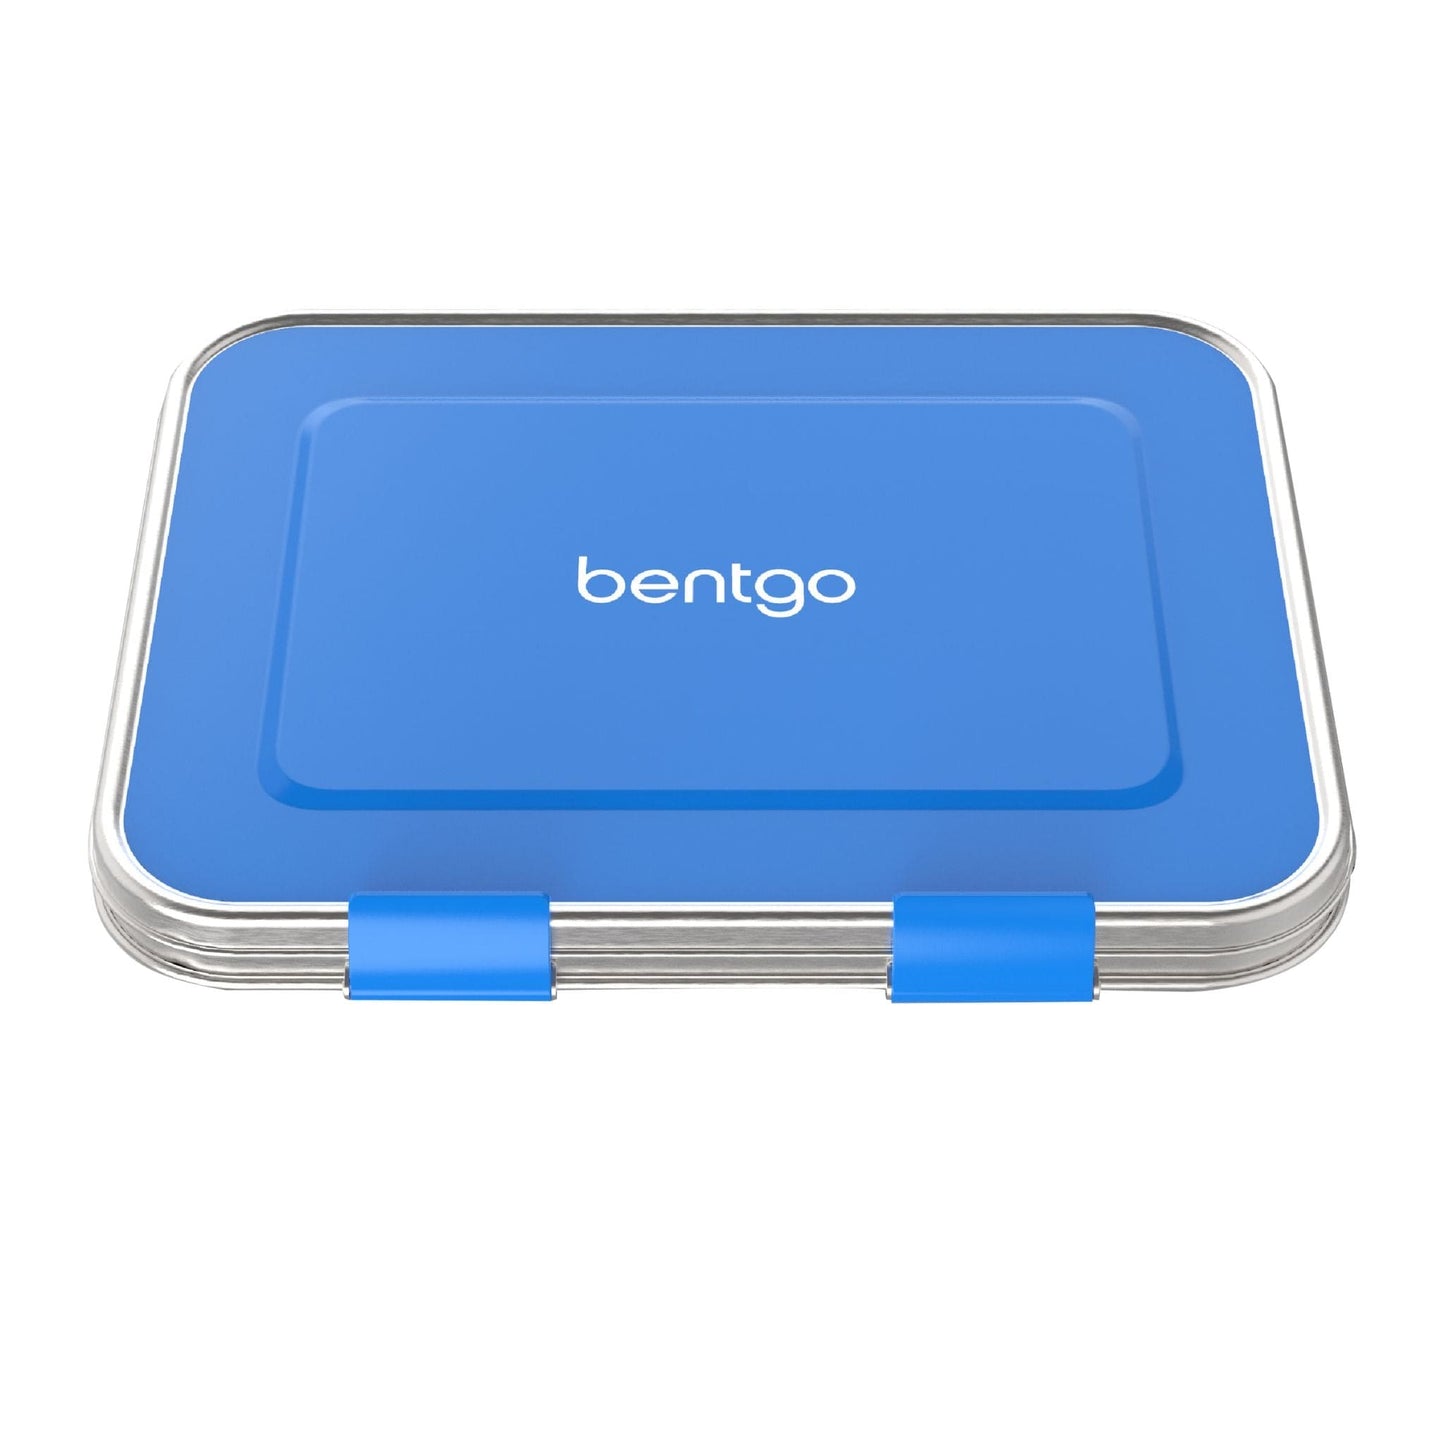 Bentgo Kids Three Compartment Leakproof Stainless Steel Lunch Box